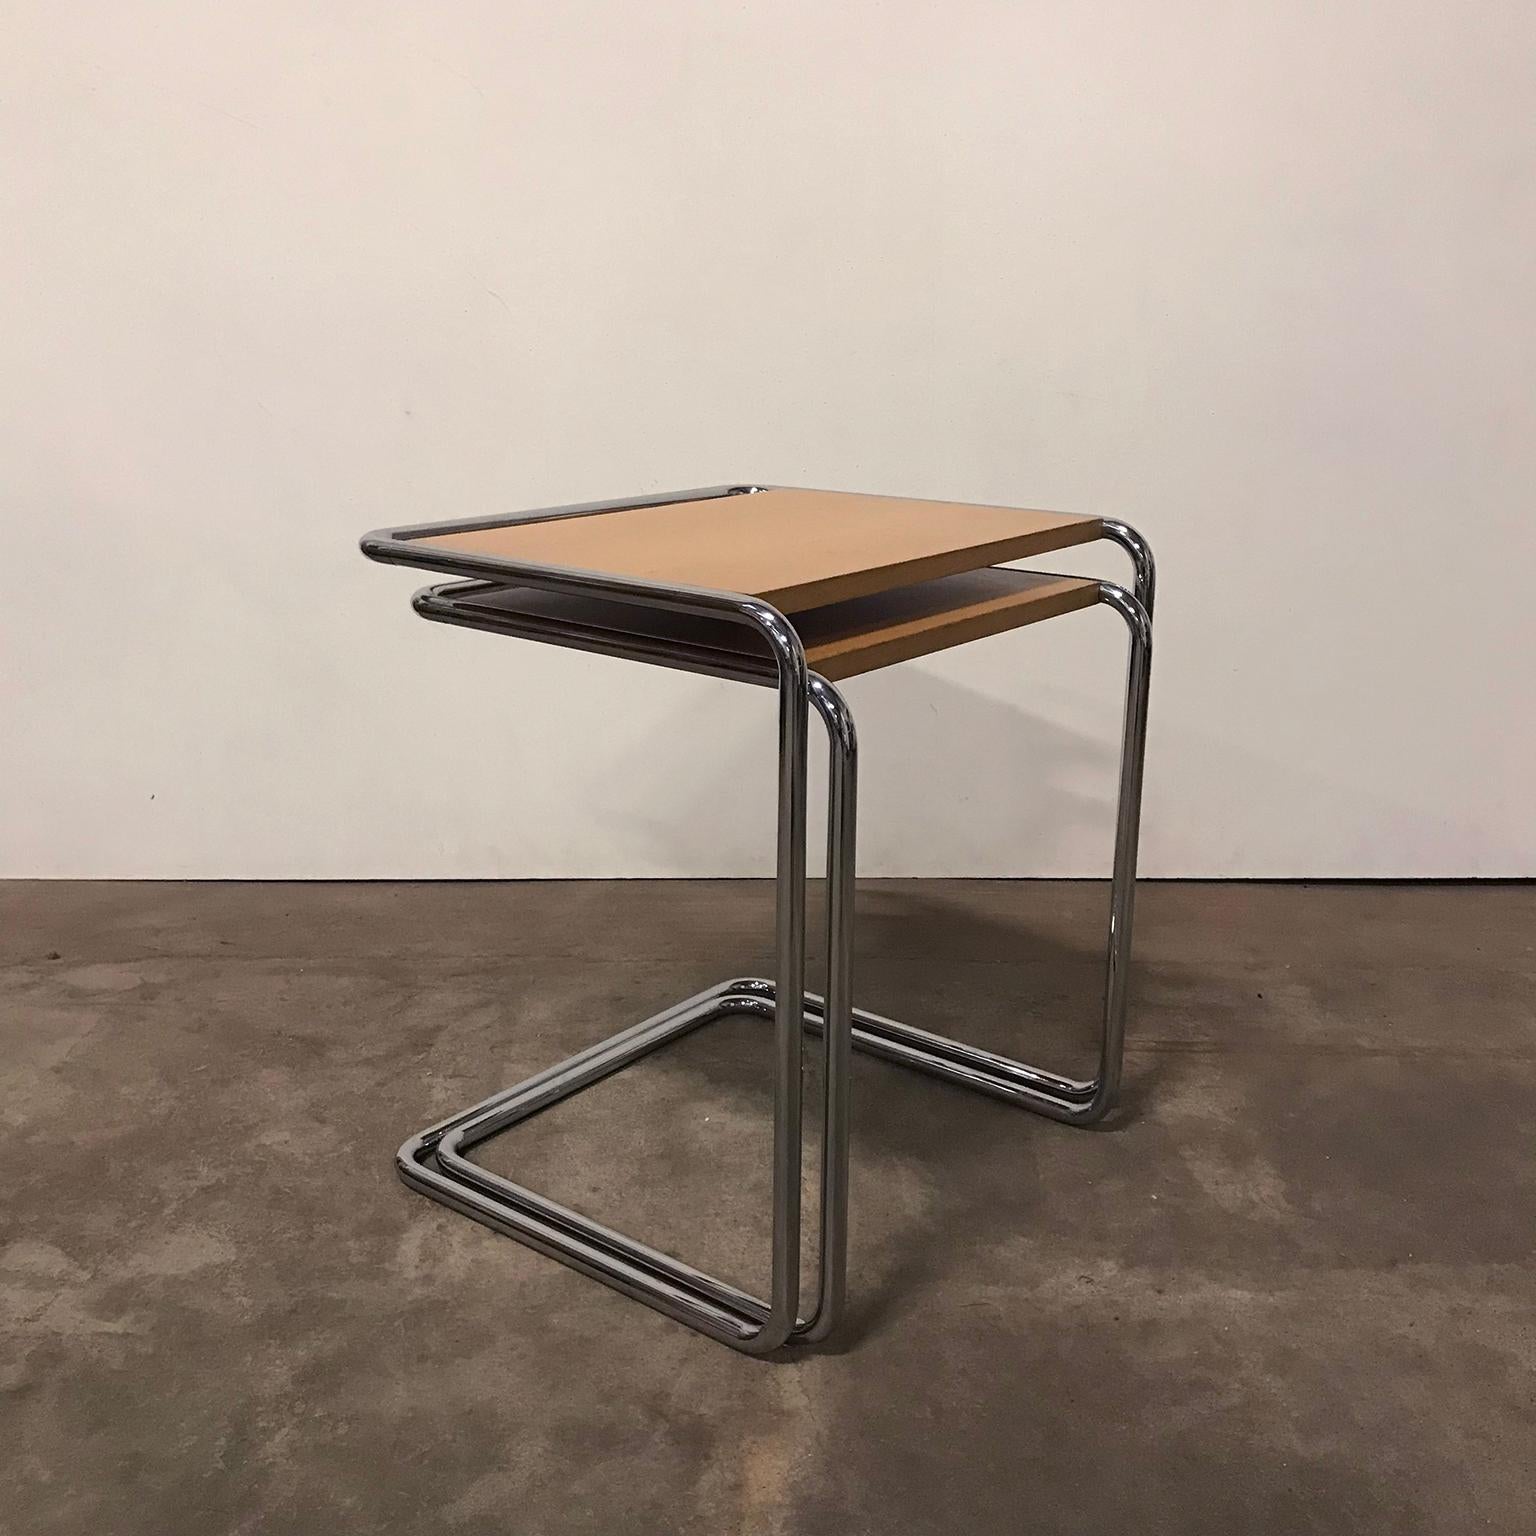 Set of beautiful side tables by Thonet, The tables are in very good condition, except for some minor traces of wear on the table tops. The tables can be used in many ways.

Total weight is 10.5 kg
The dimensions of the highest table is 57 cm H x